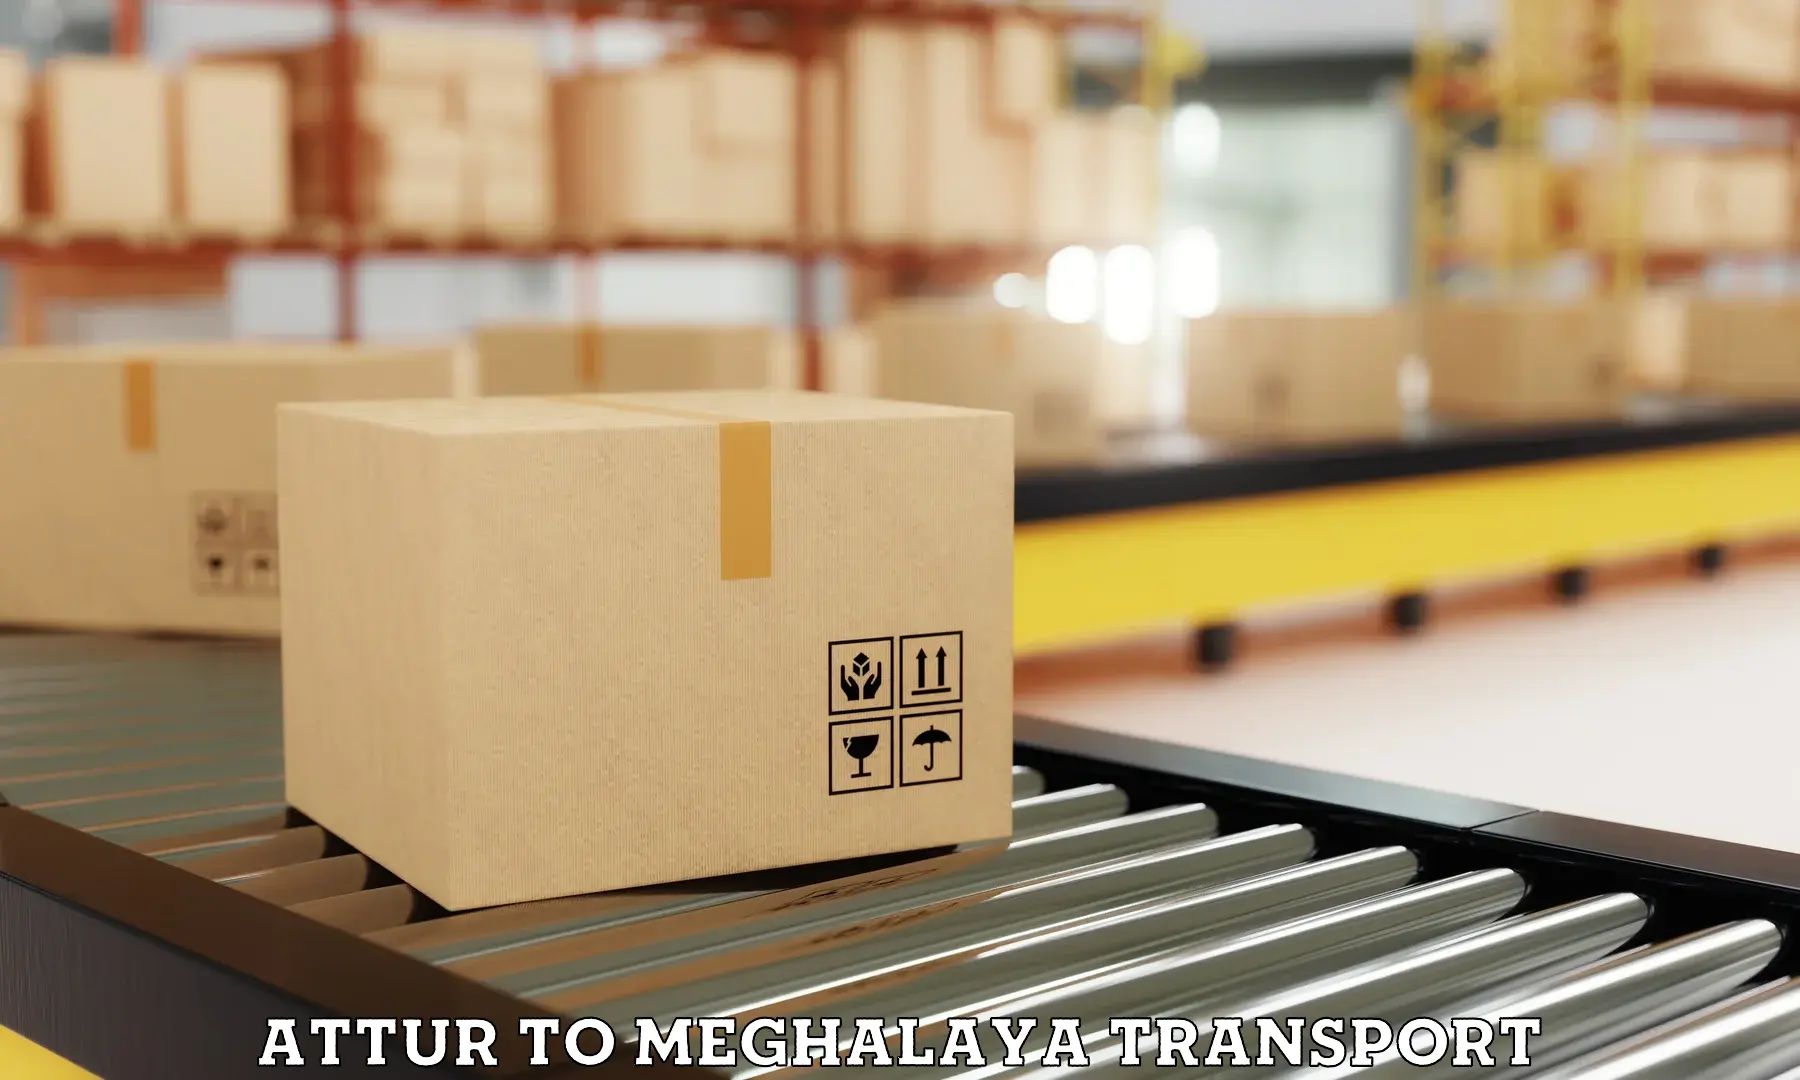 Goods delivery service Attur to Meghalaya